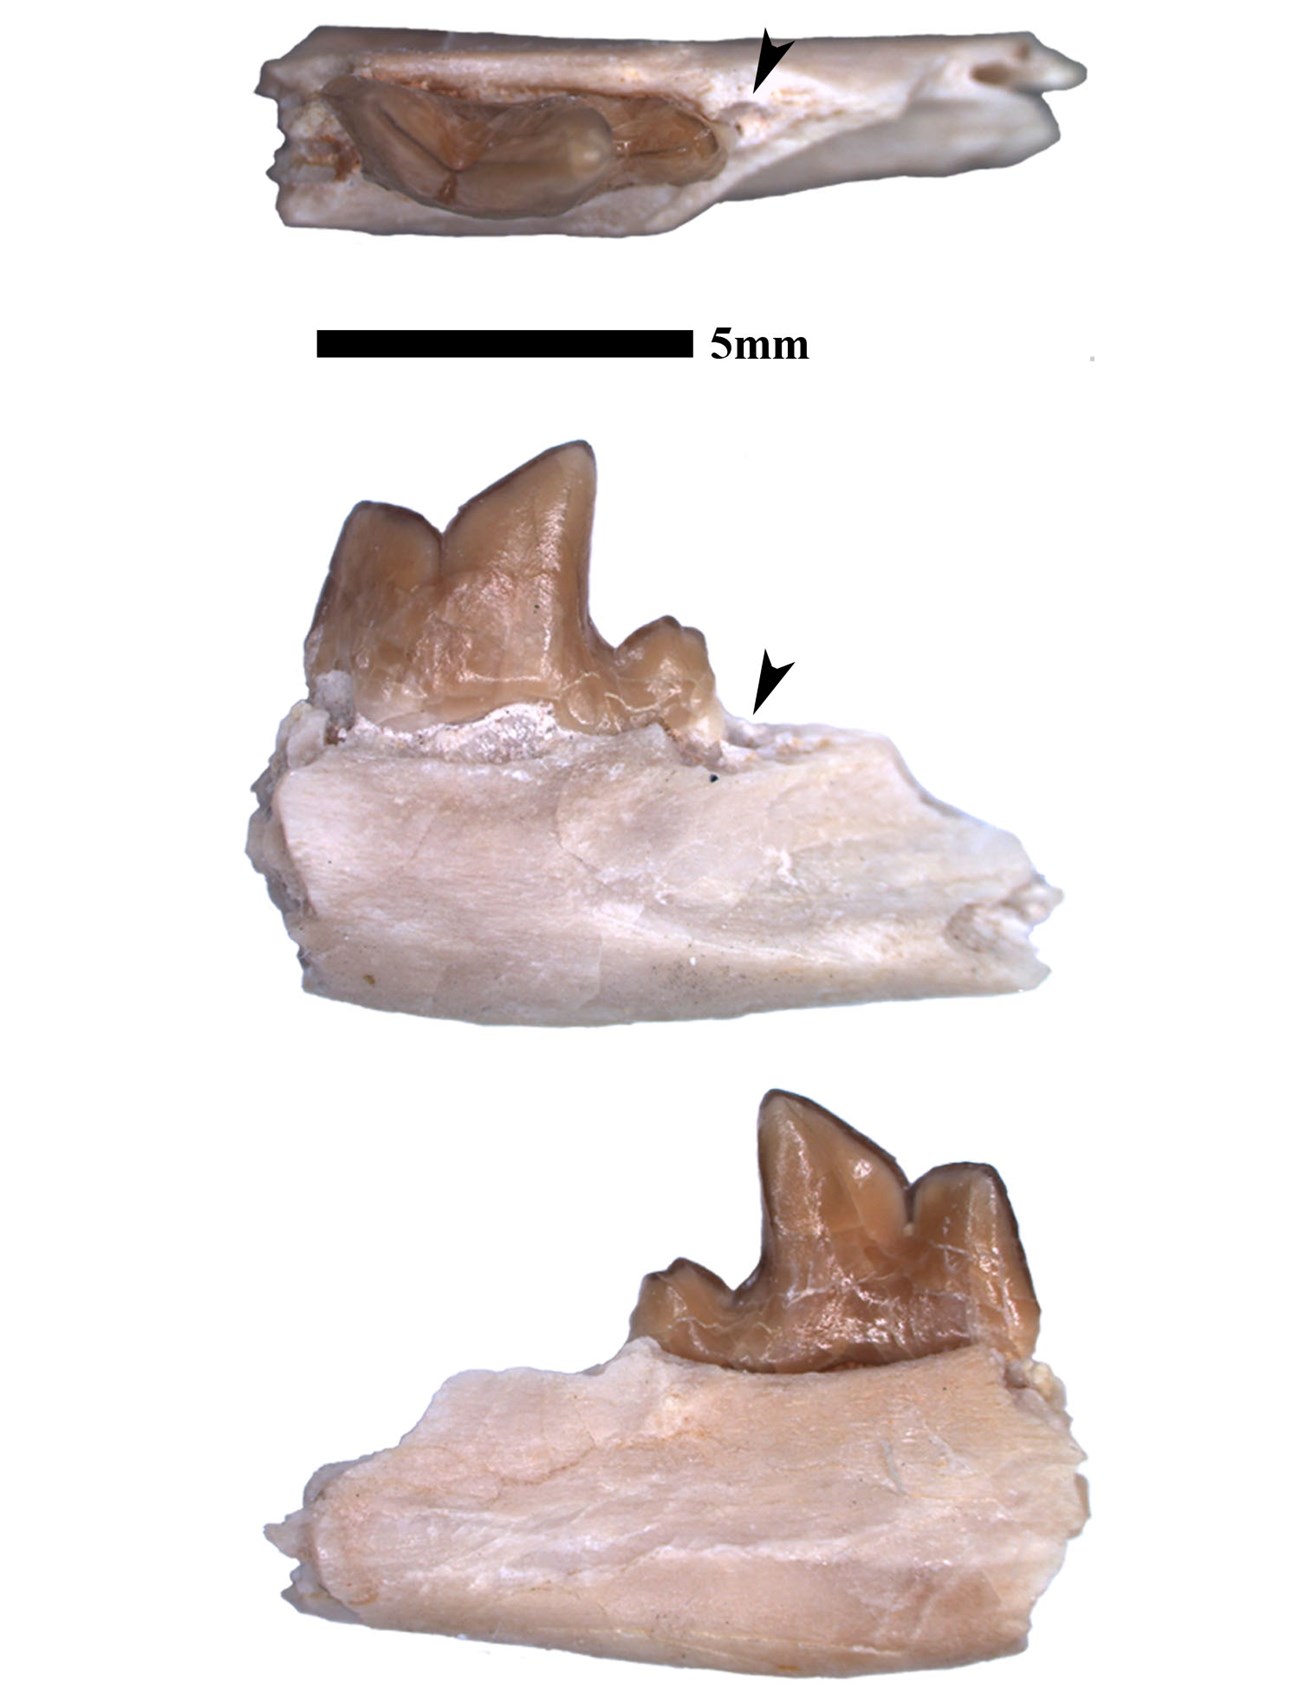 3 photos showing different views of a fossil jaw fragment with teeth